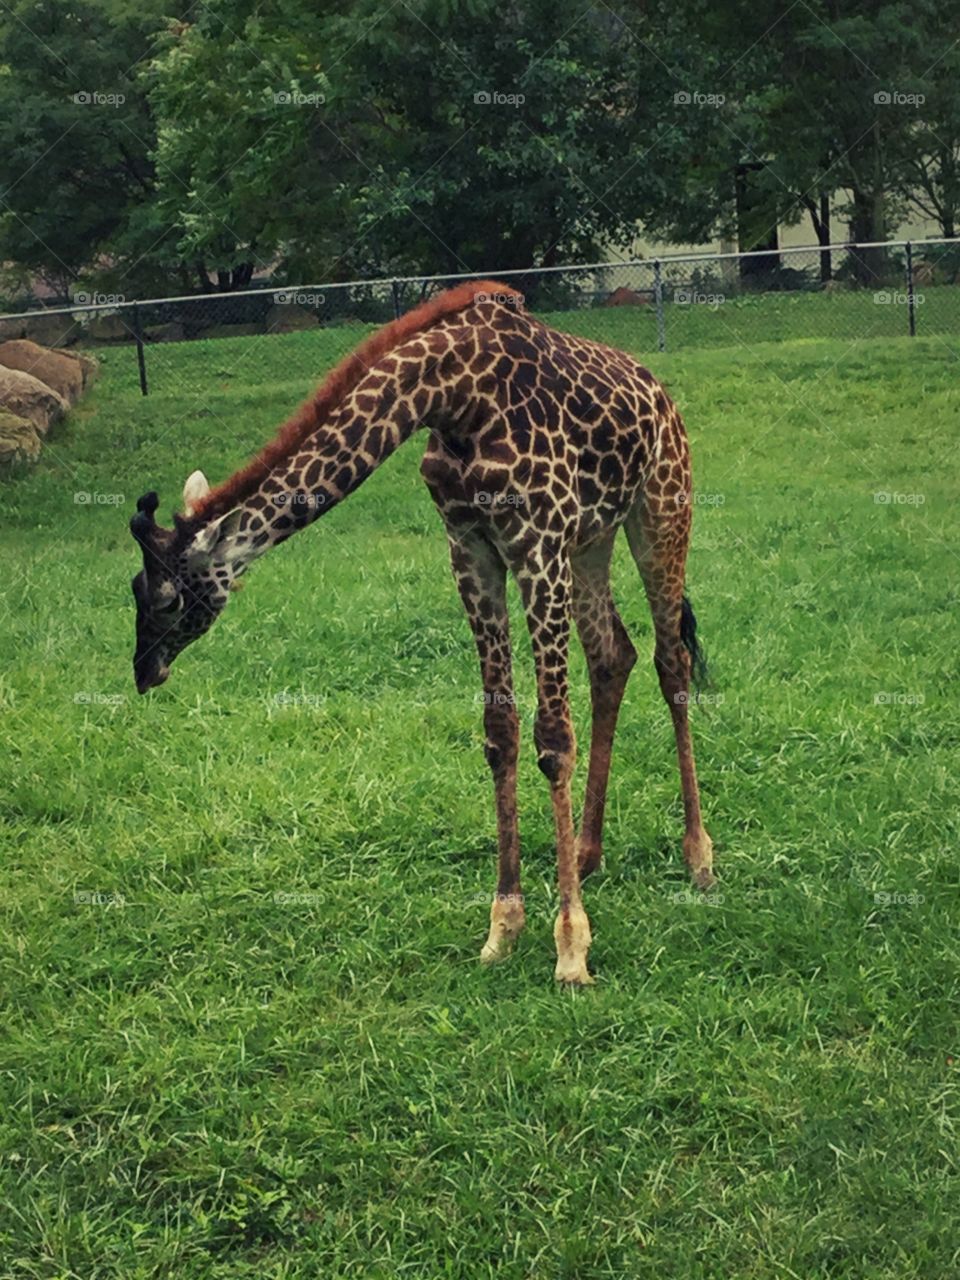 This is a baby giraffe at the Cleveland metro parks zoo